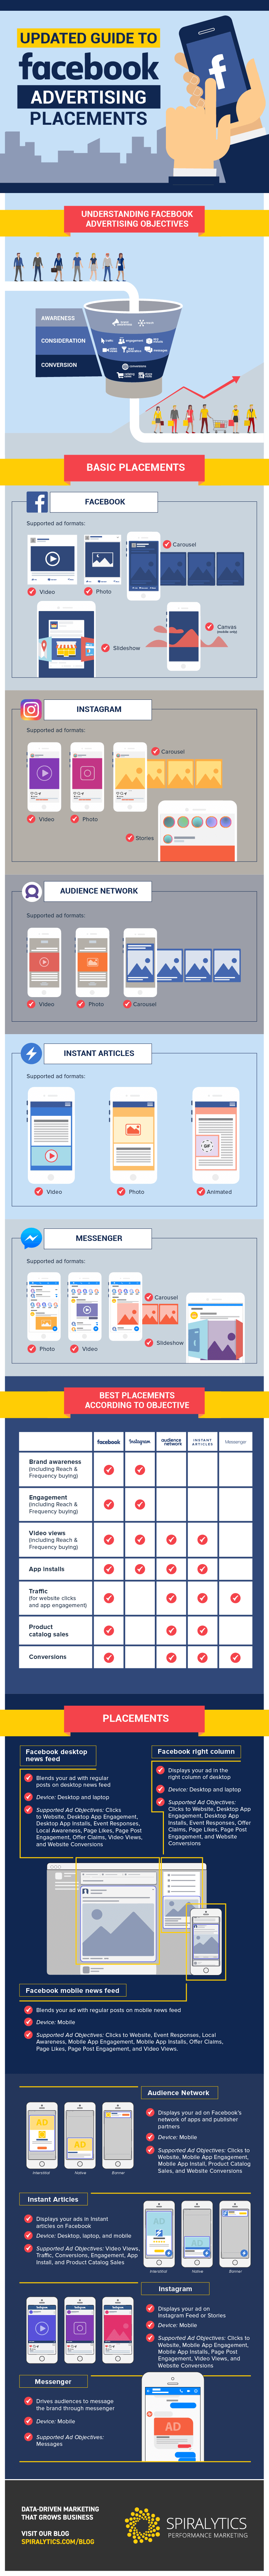 Updated-Guide-to-Facebook-Advertising-Placements